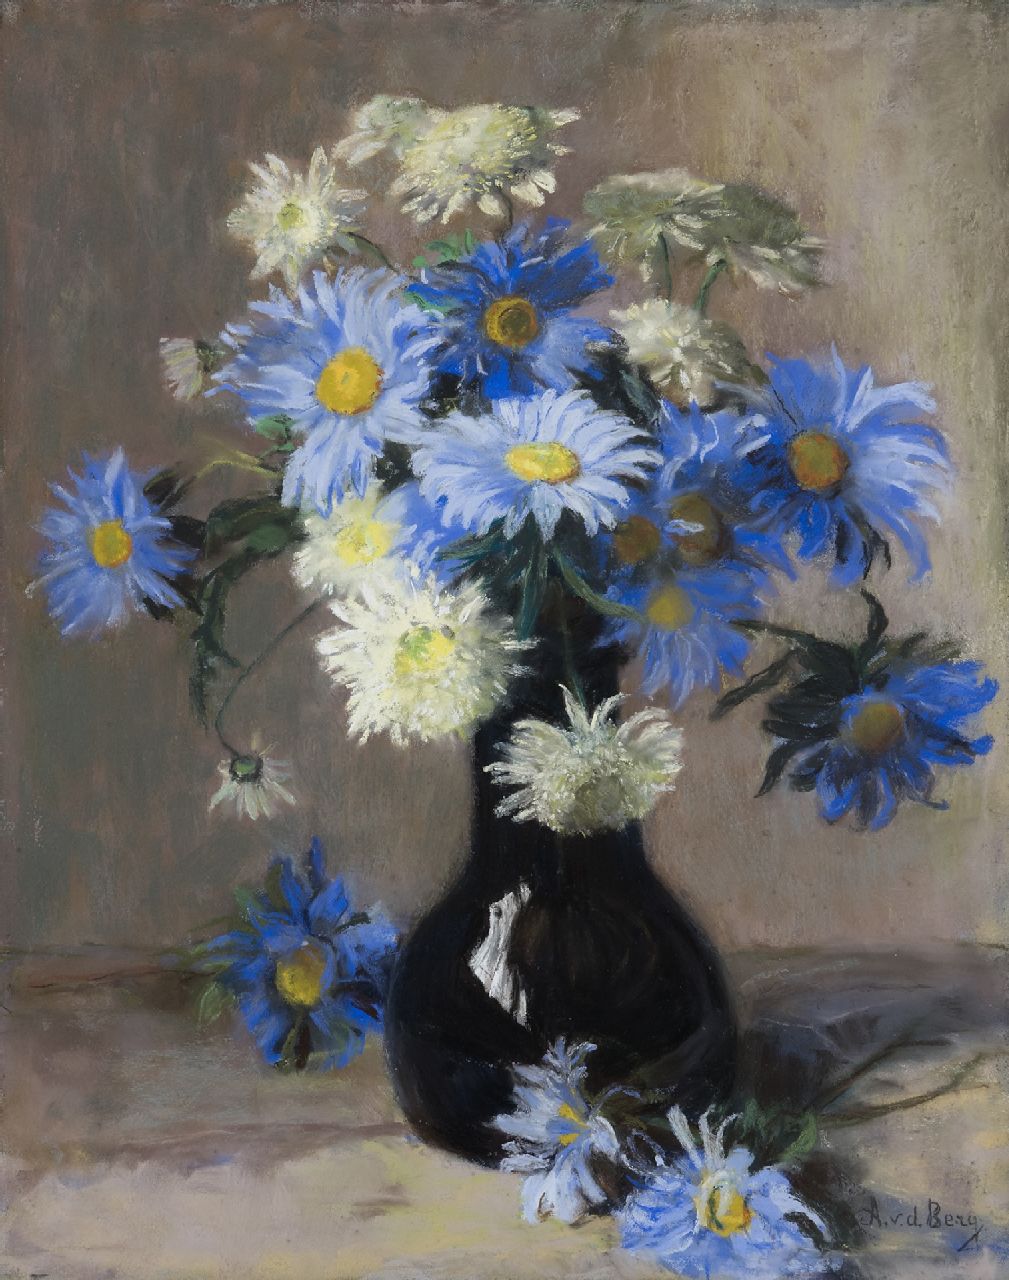 Ans van den Berg | Flower still life with chrysanthemums and aster  chrysanthemums, pastel on paper, 49.0 x 39.0 cm, signed l.r.